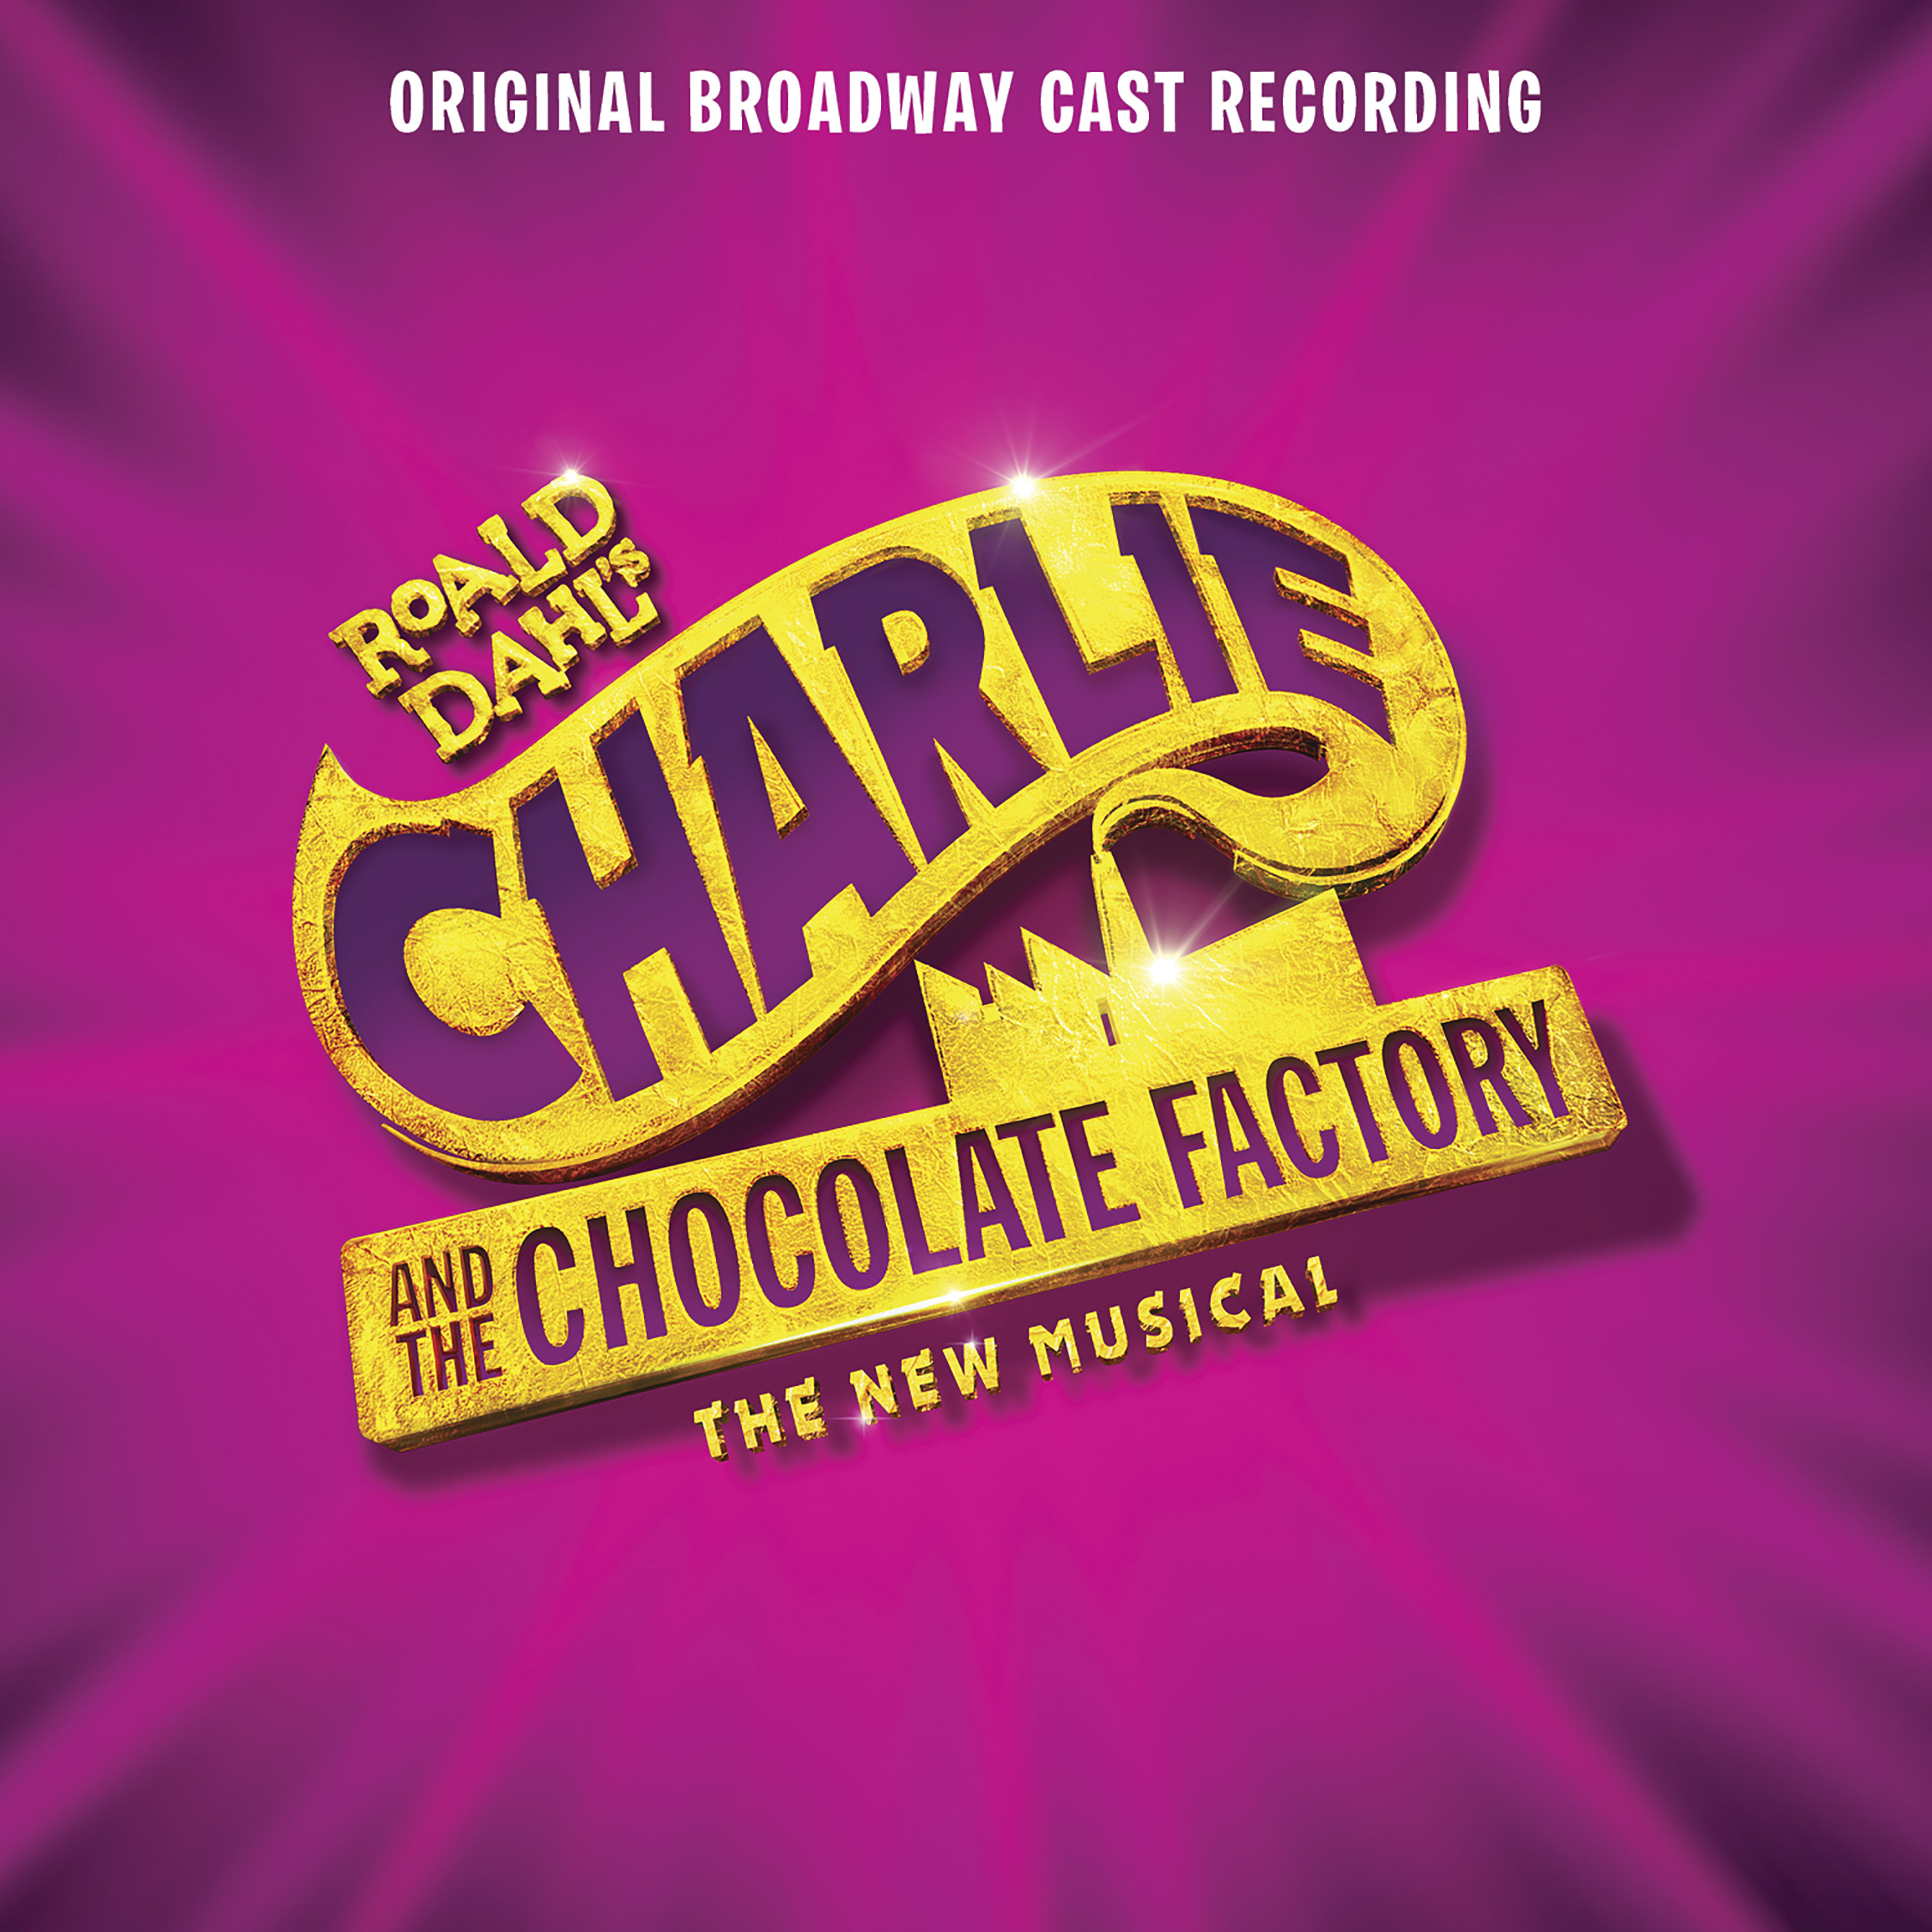 Original broadway. Charlie and the Chocolate Factory OST. Roald Dahl Charlie and the Chocolate Factory the New Musical. Broadway Cast recording. Вонка шоколад фото.